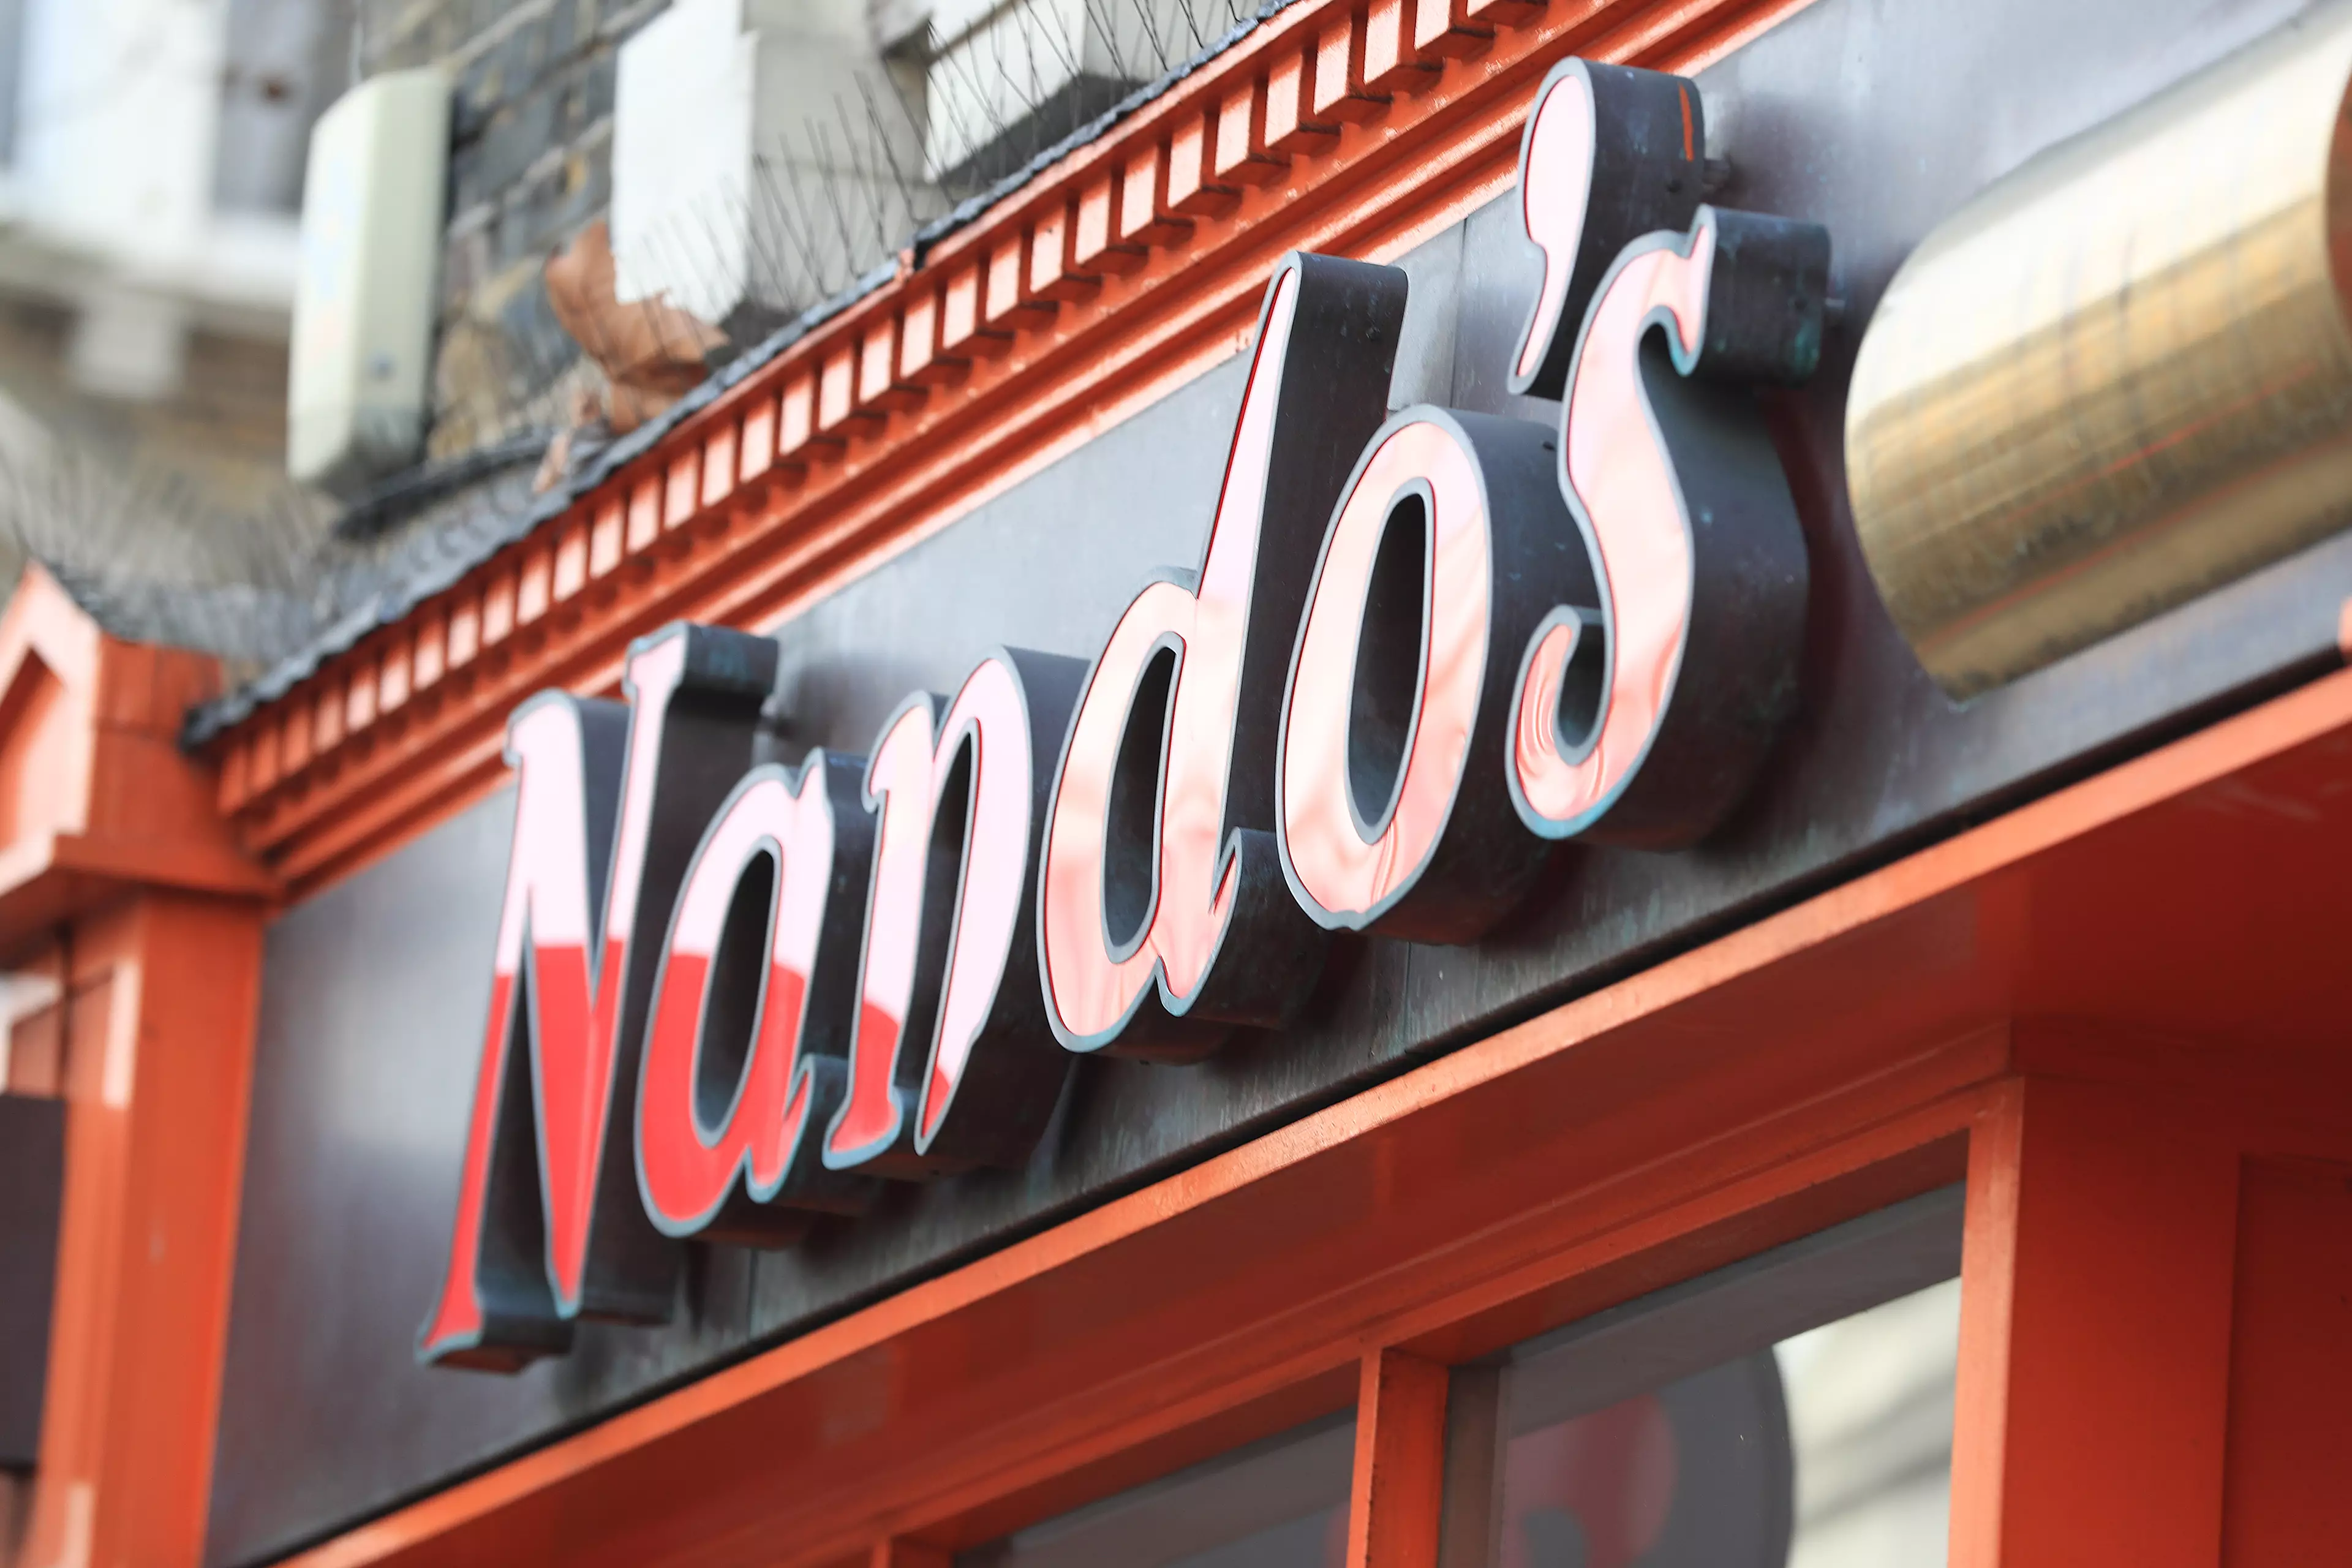 The charity wrap will be available in all Nando's across the country